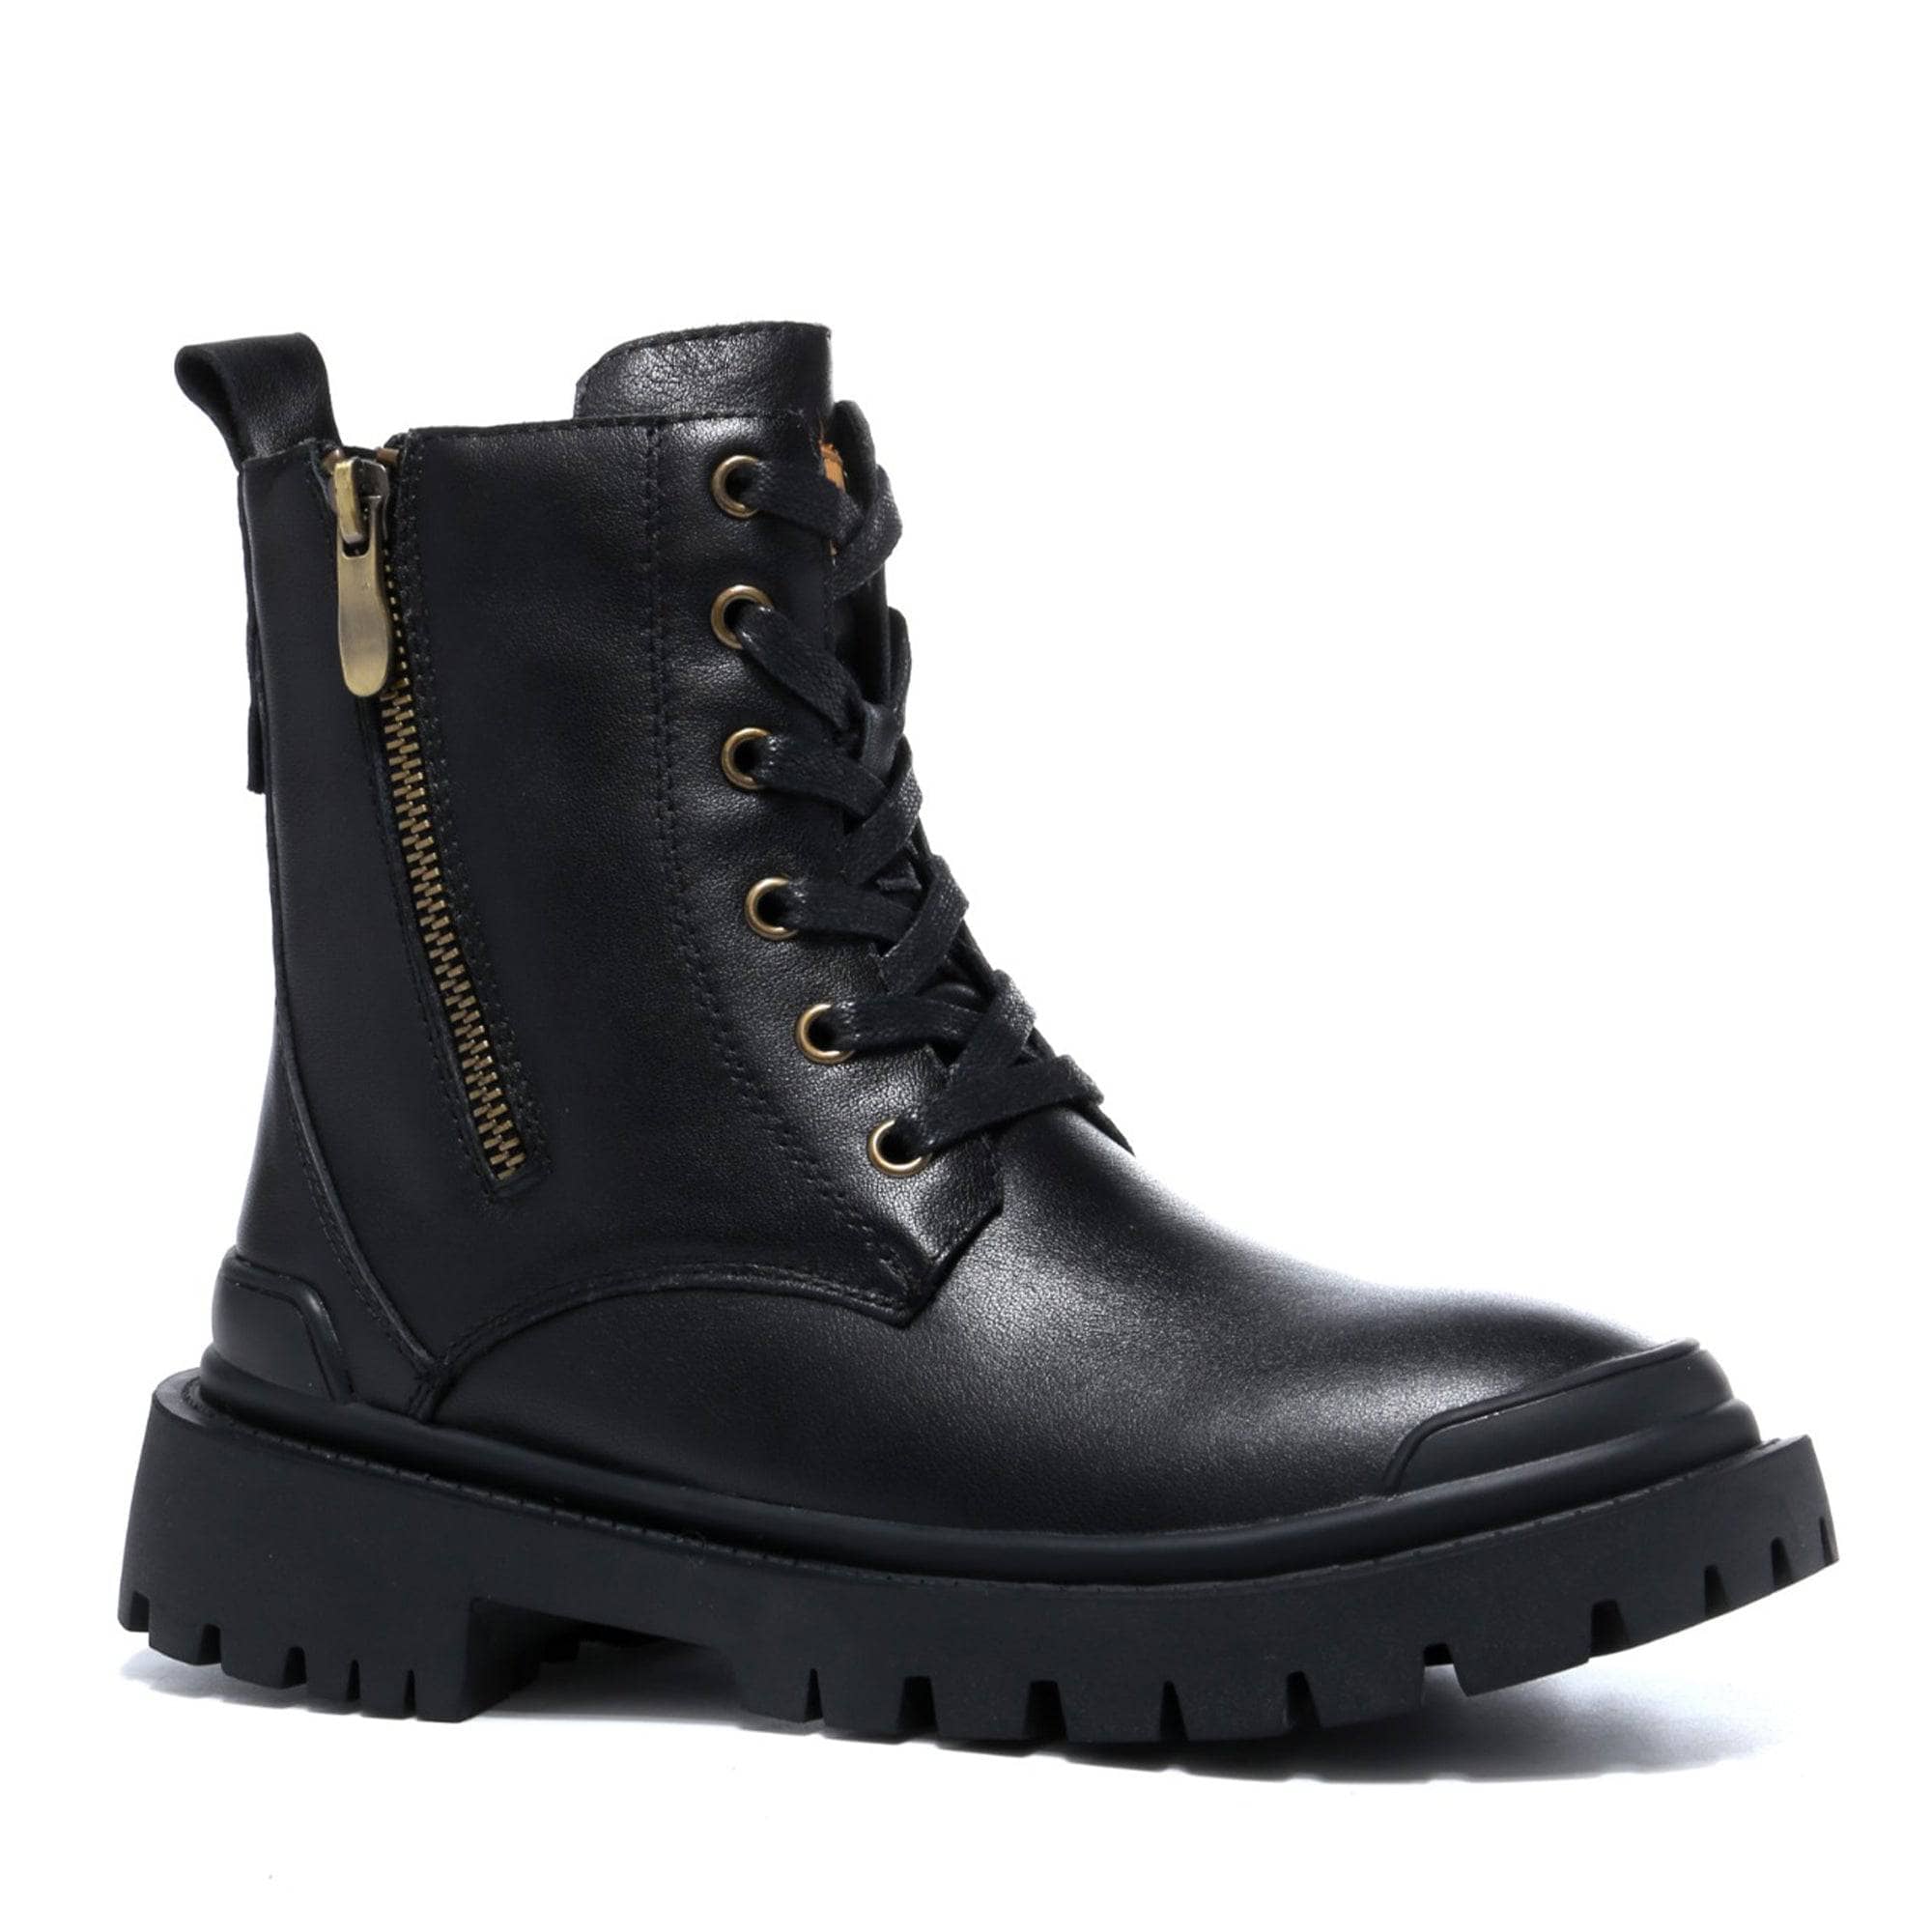 Leather Ugg Boots - UGG Ivanna Laced Up Leather Boots - Original UGG Australia Classic